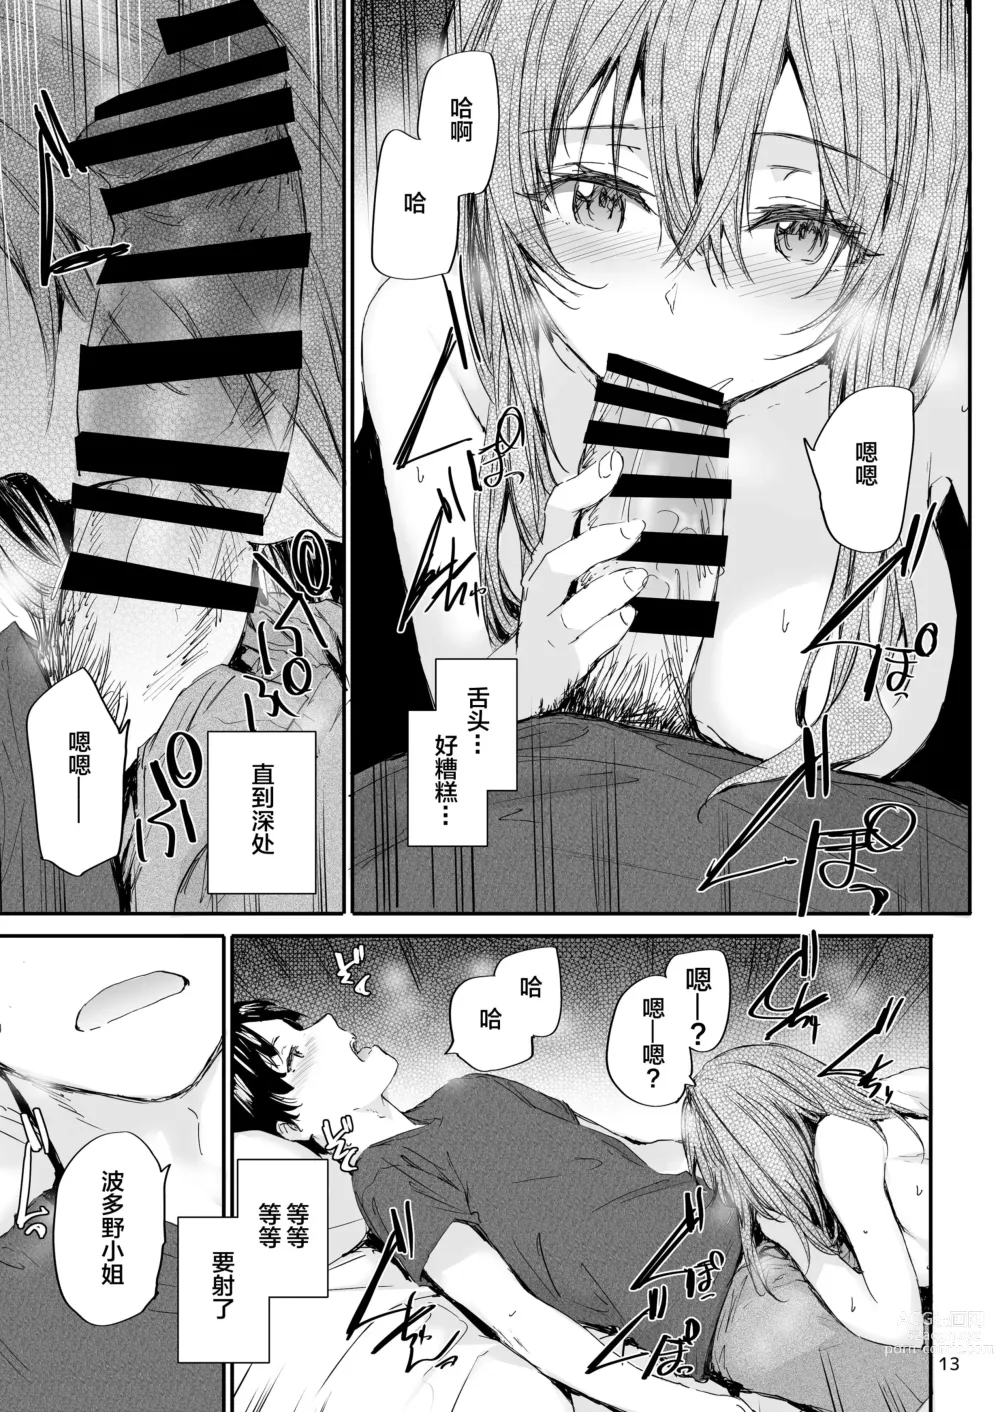 Page 14 of doujinshi Osagari Sex Friend Another 2 - Pass The Sex Friend Another  Vol. 2